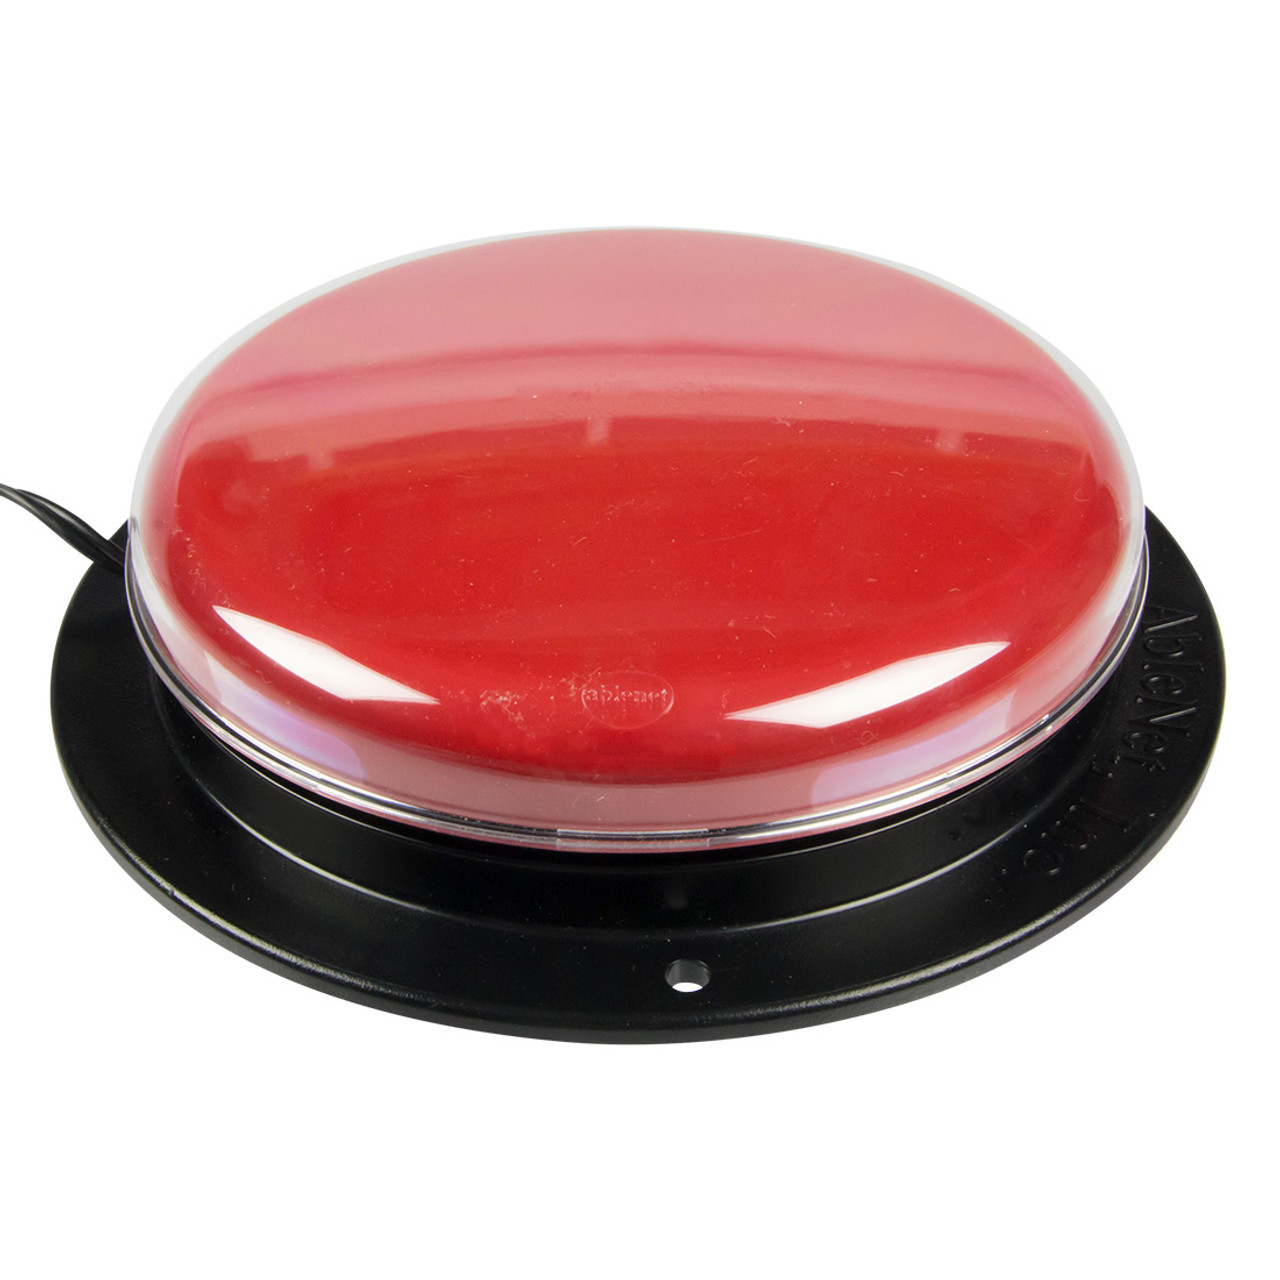 The Red Button 